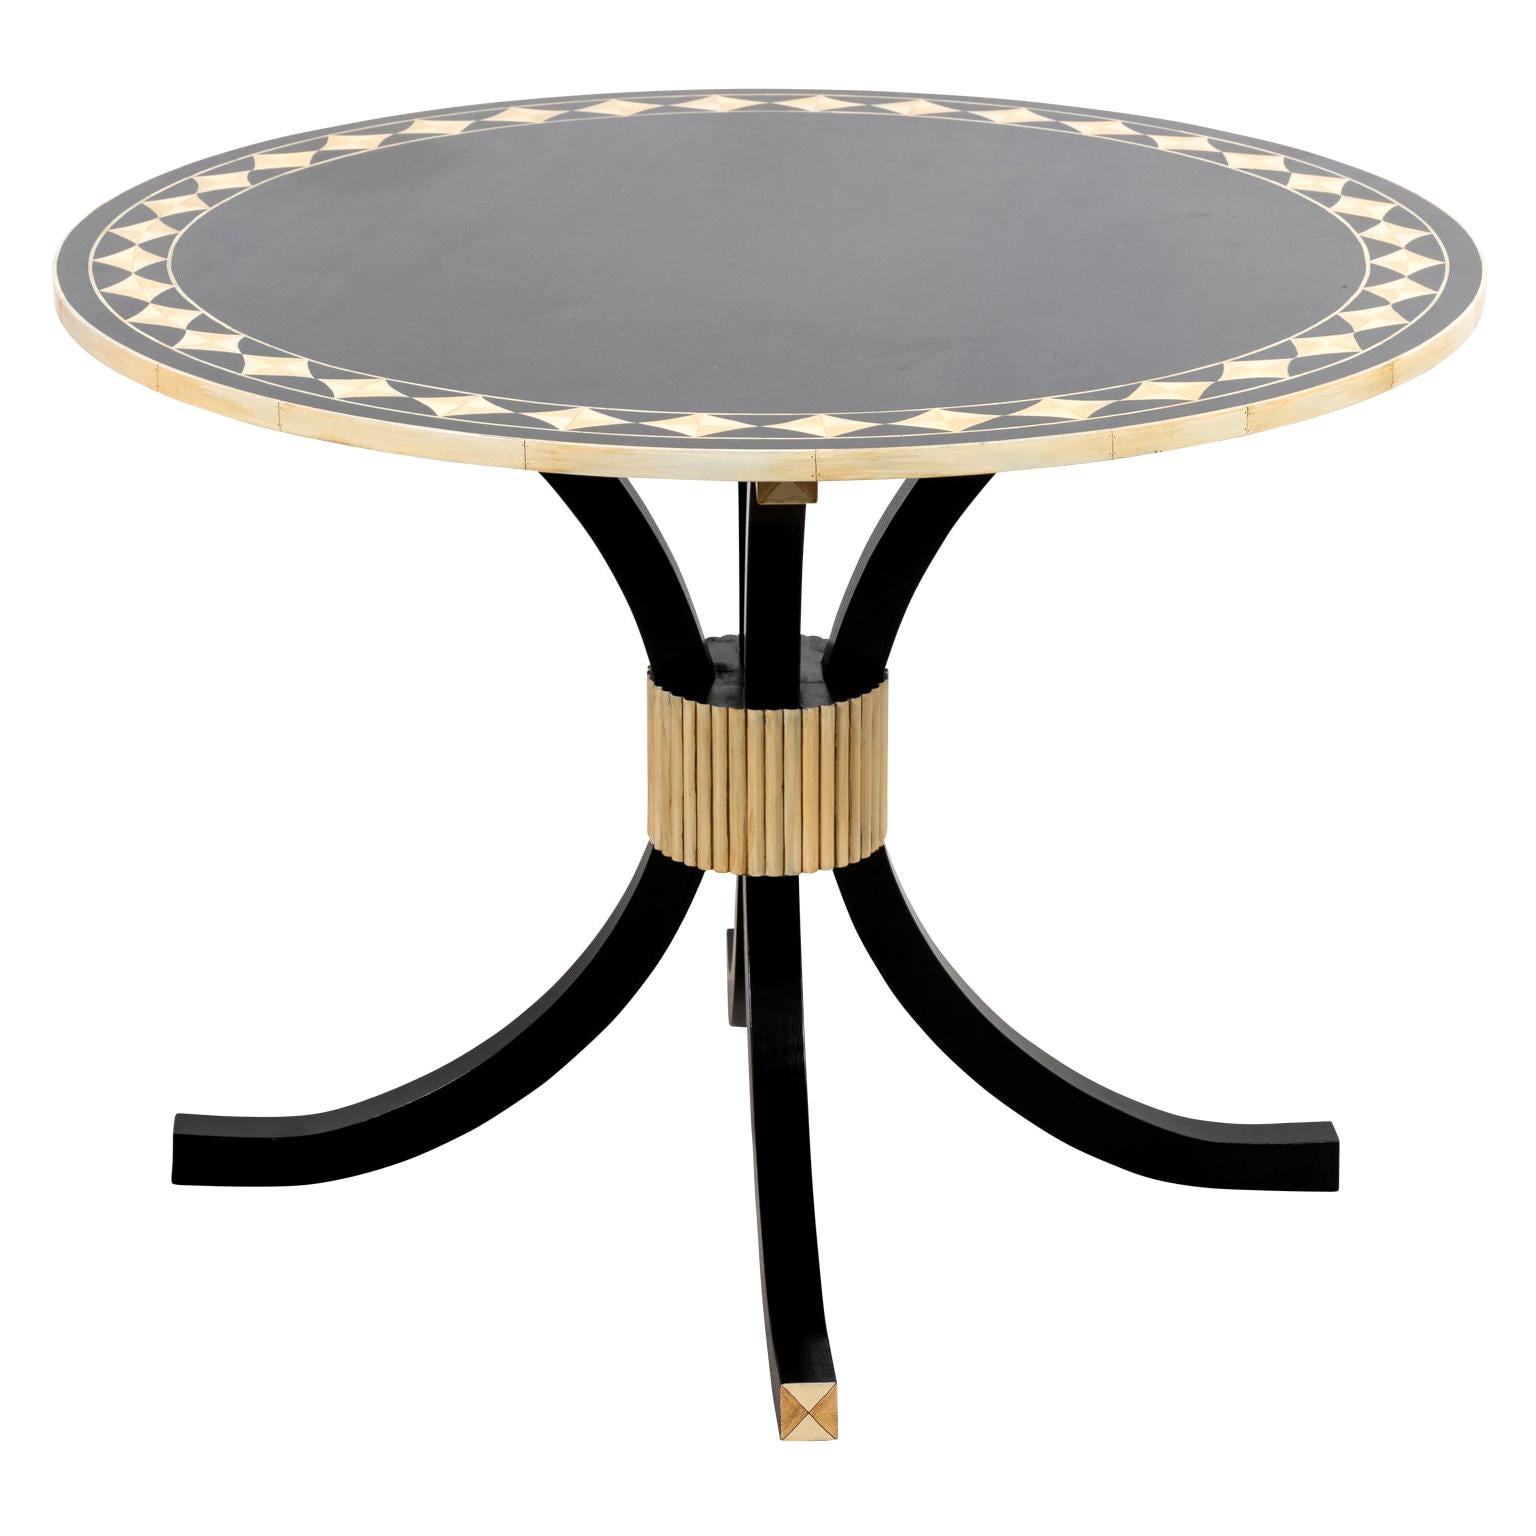 Black Ebony Round Table with Faux Bone and Ivory Detail For Sale